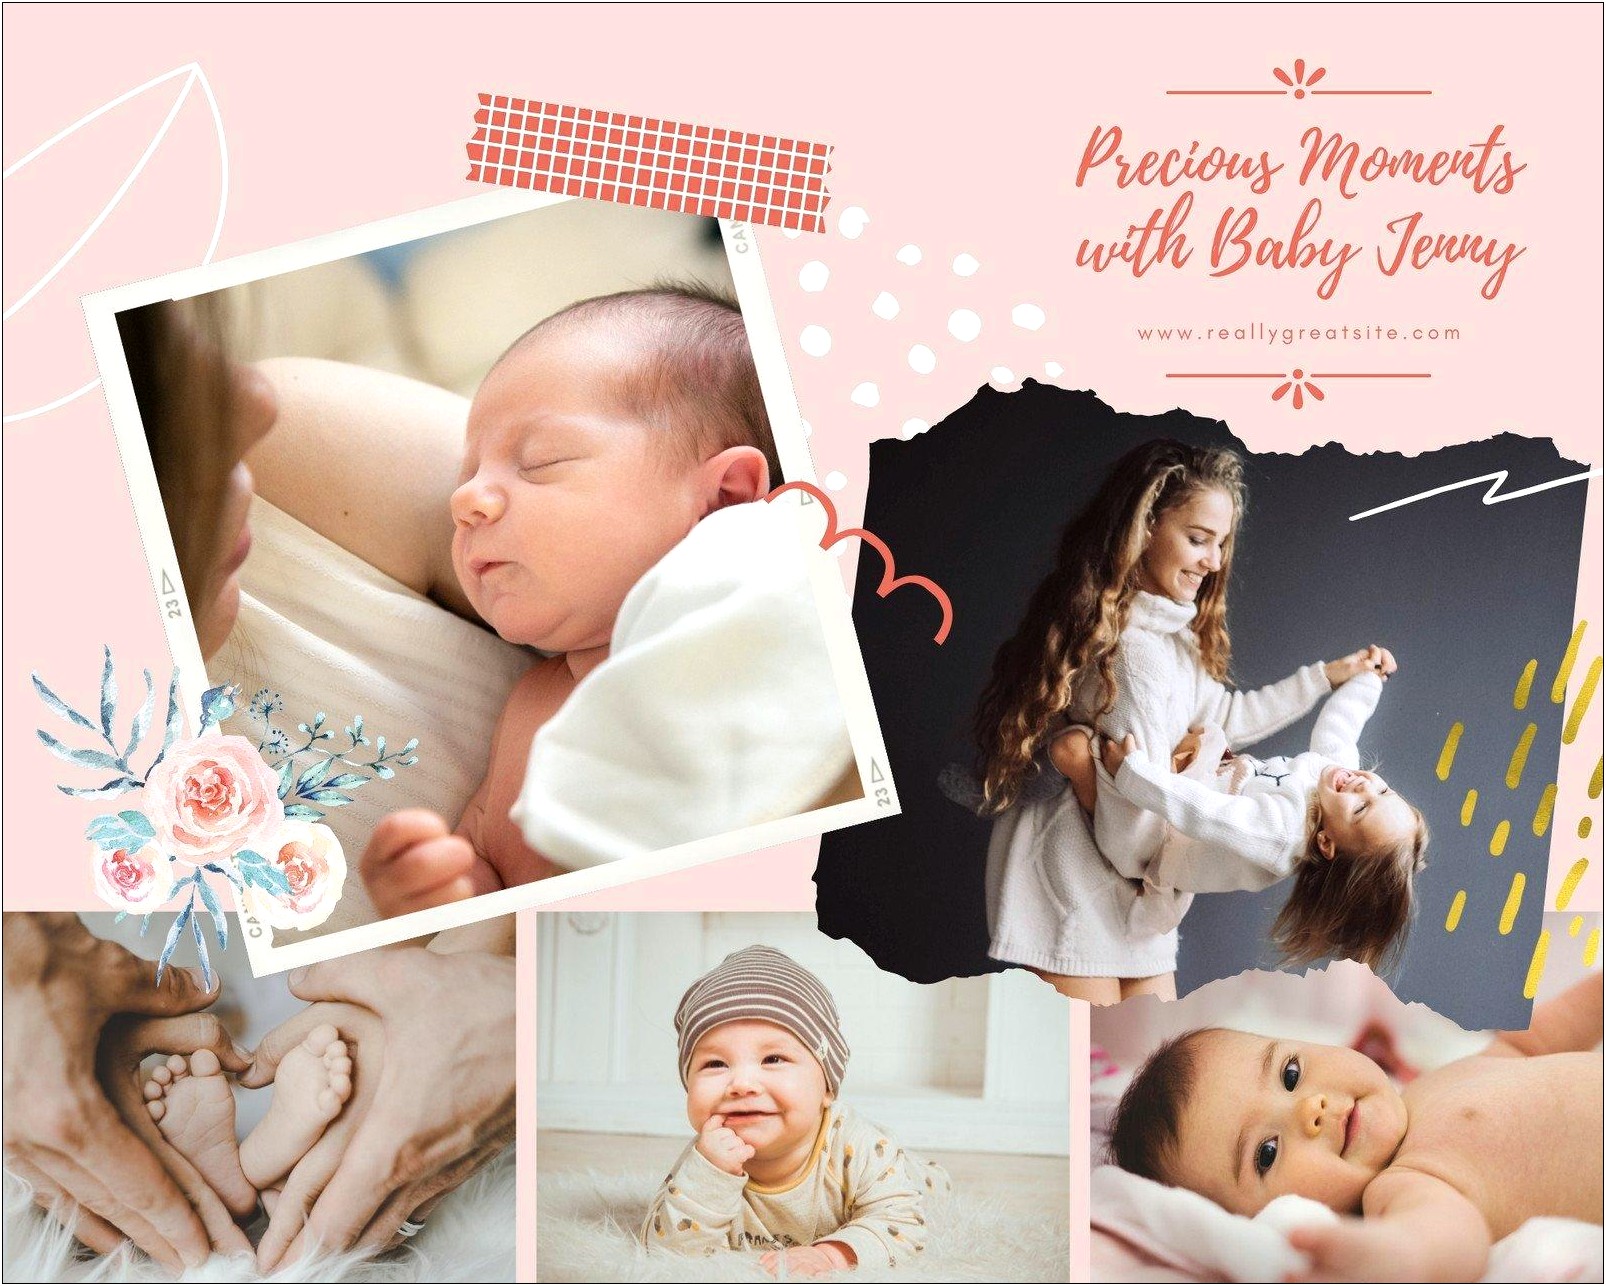 Free Online Photo Baby Girl Template